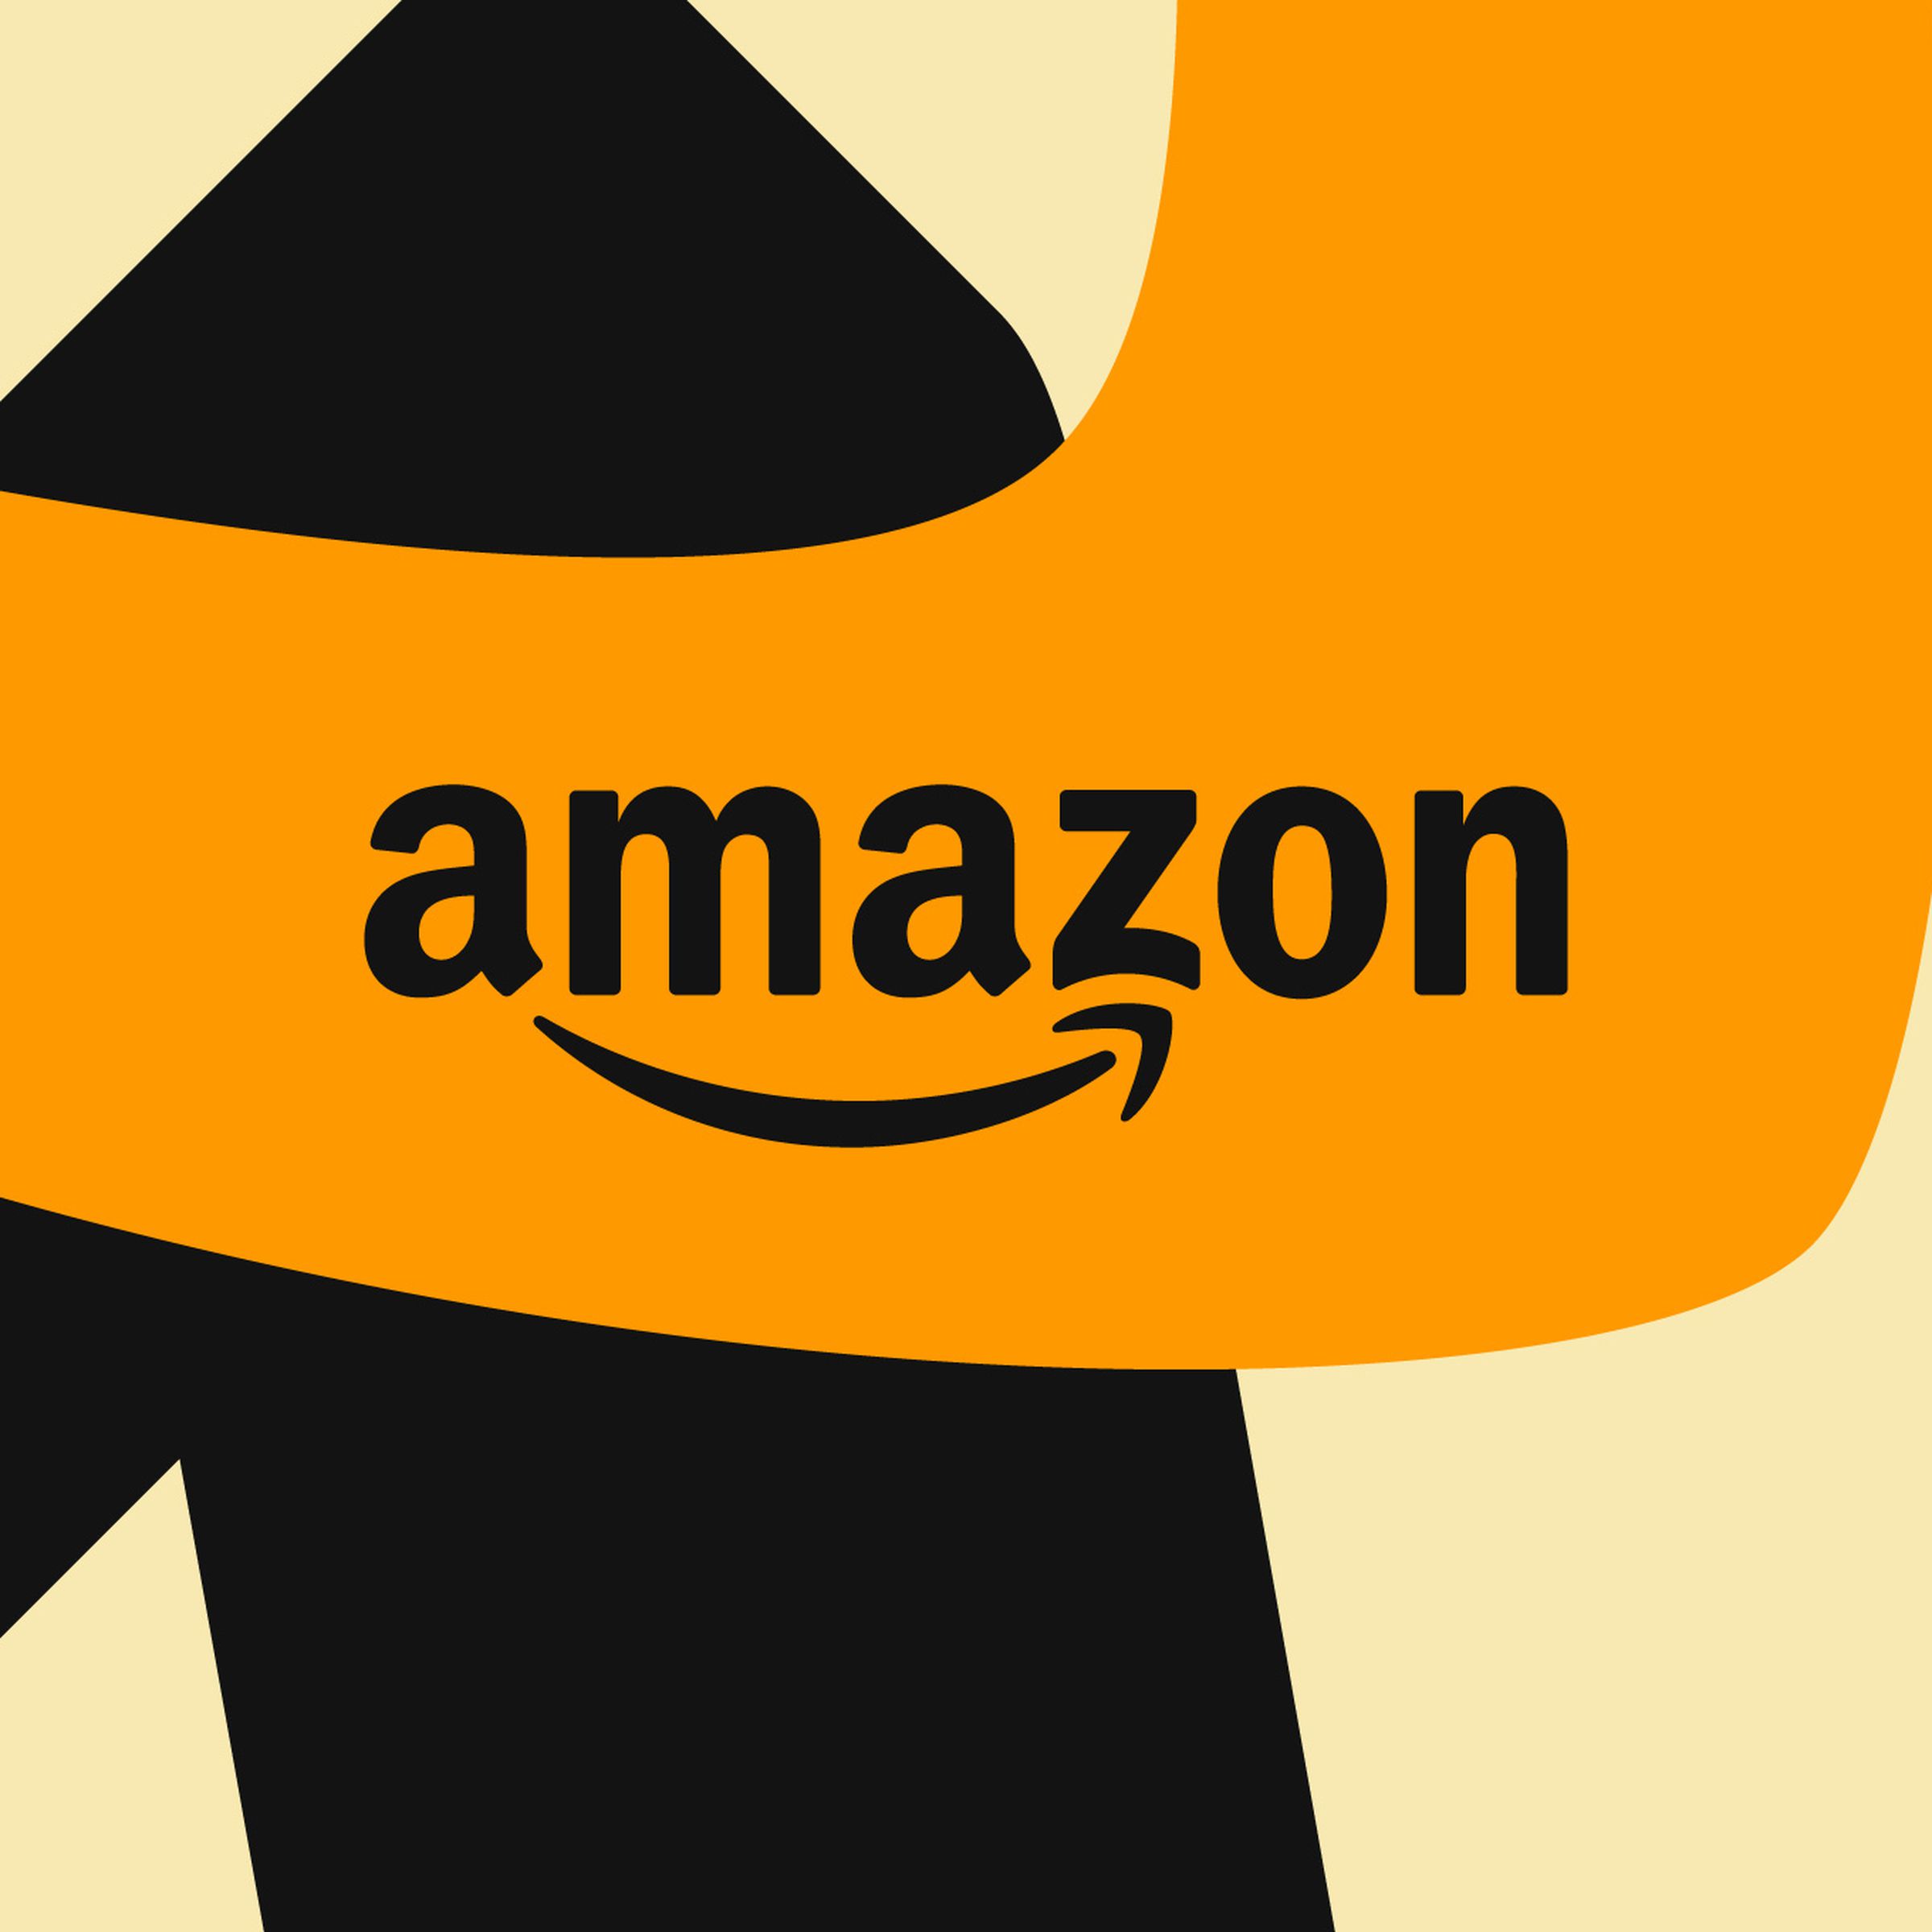 Illustration of Amazon’s wordmark on an orange, black, and tan background made up of overlapping lines.